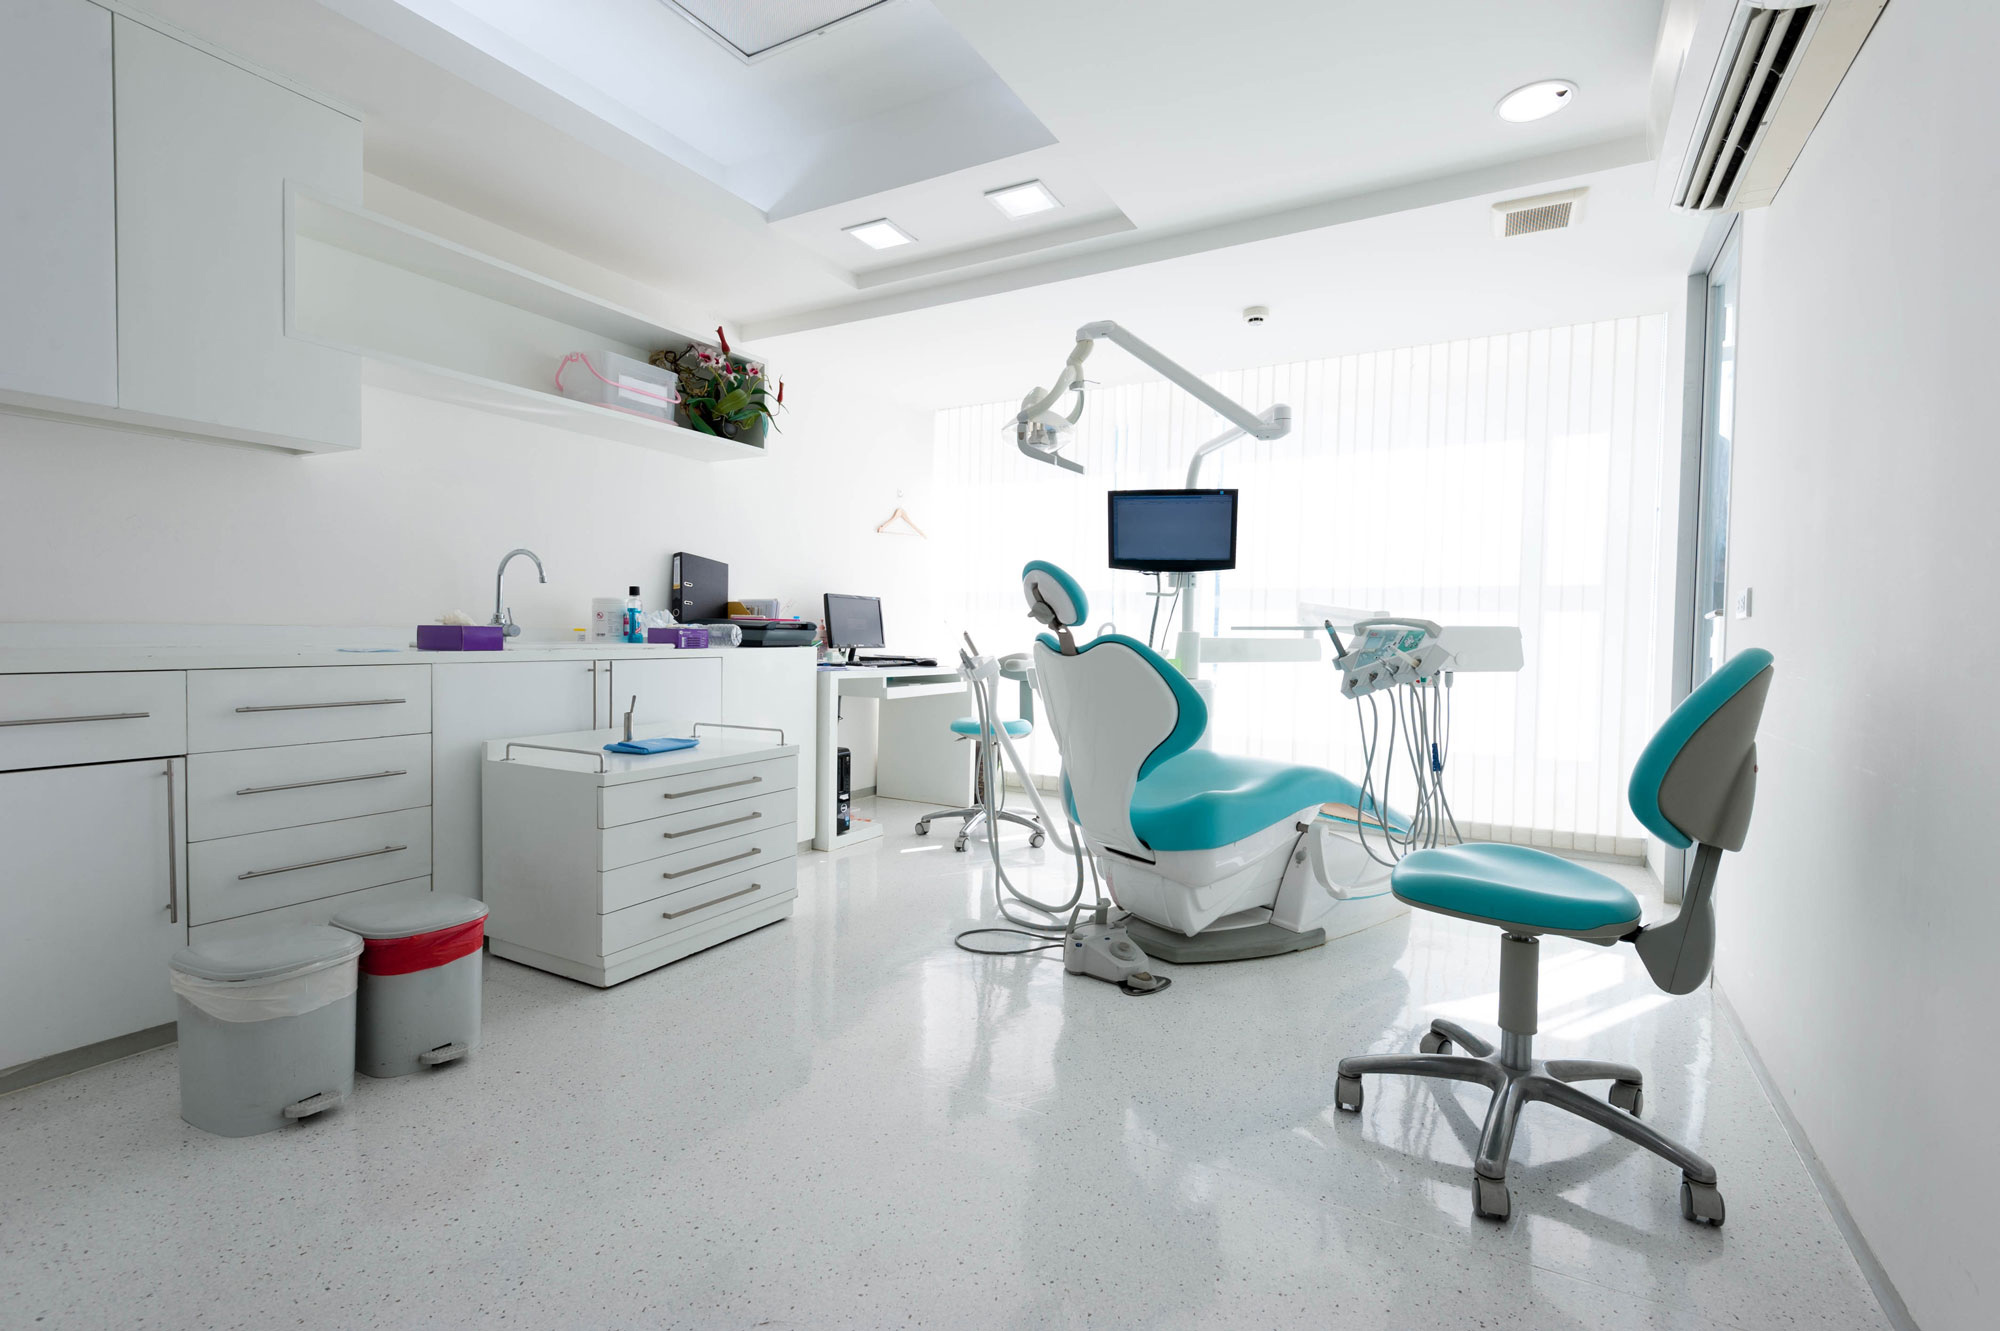 Unrivaled expertise in dental office real estate consulting provided by Canadian Dental Services (CDS).